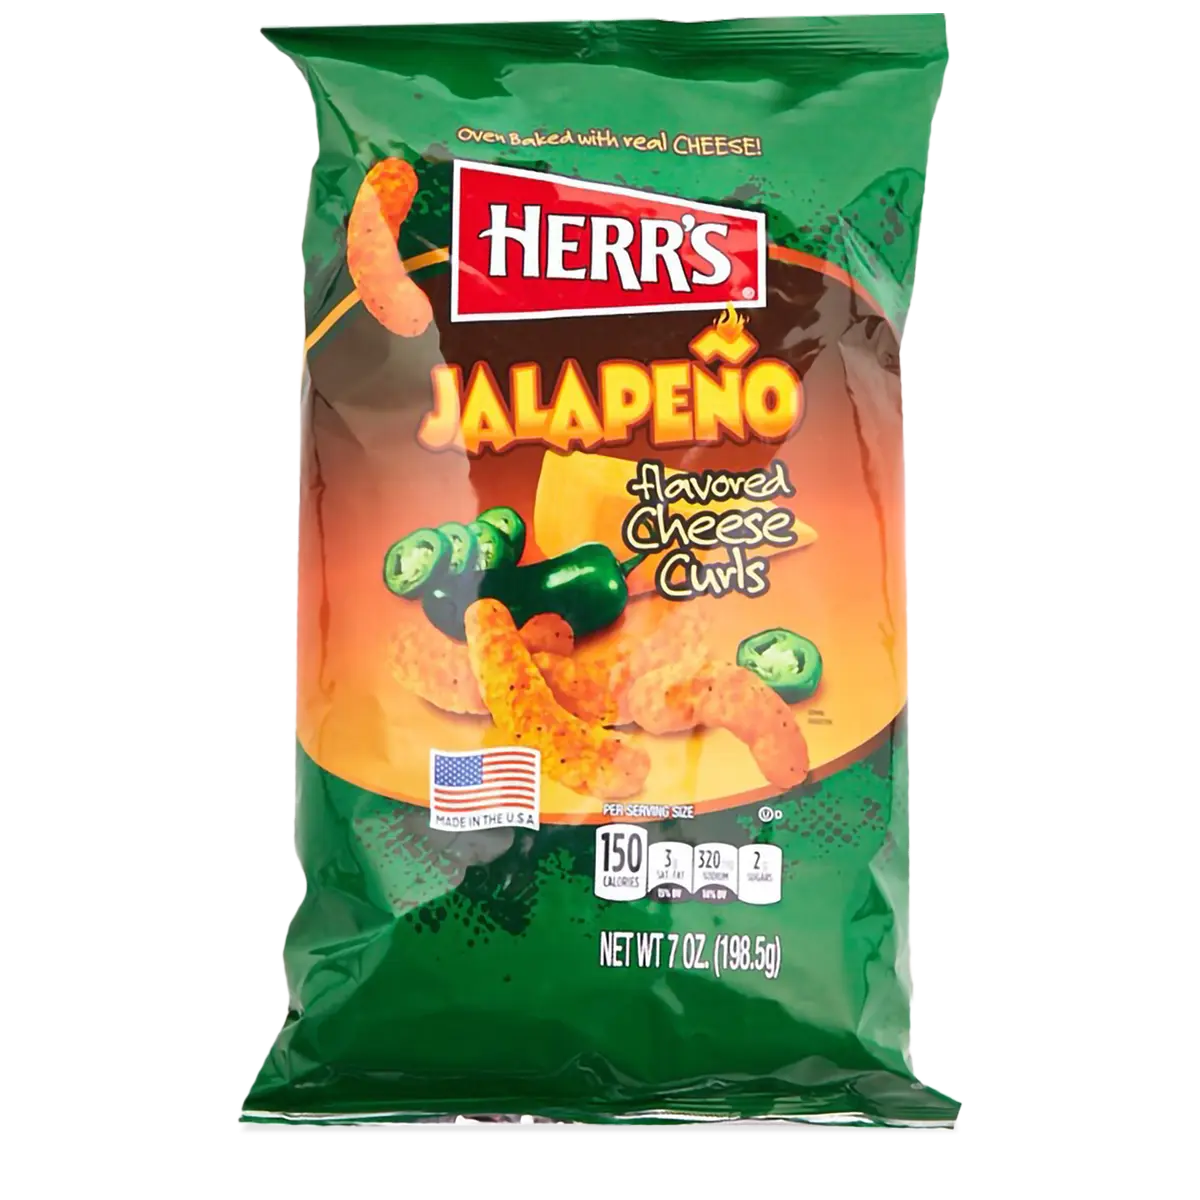 Herrs Jalapeno Poppers Cheese Curls 198g